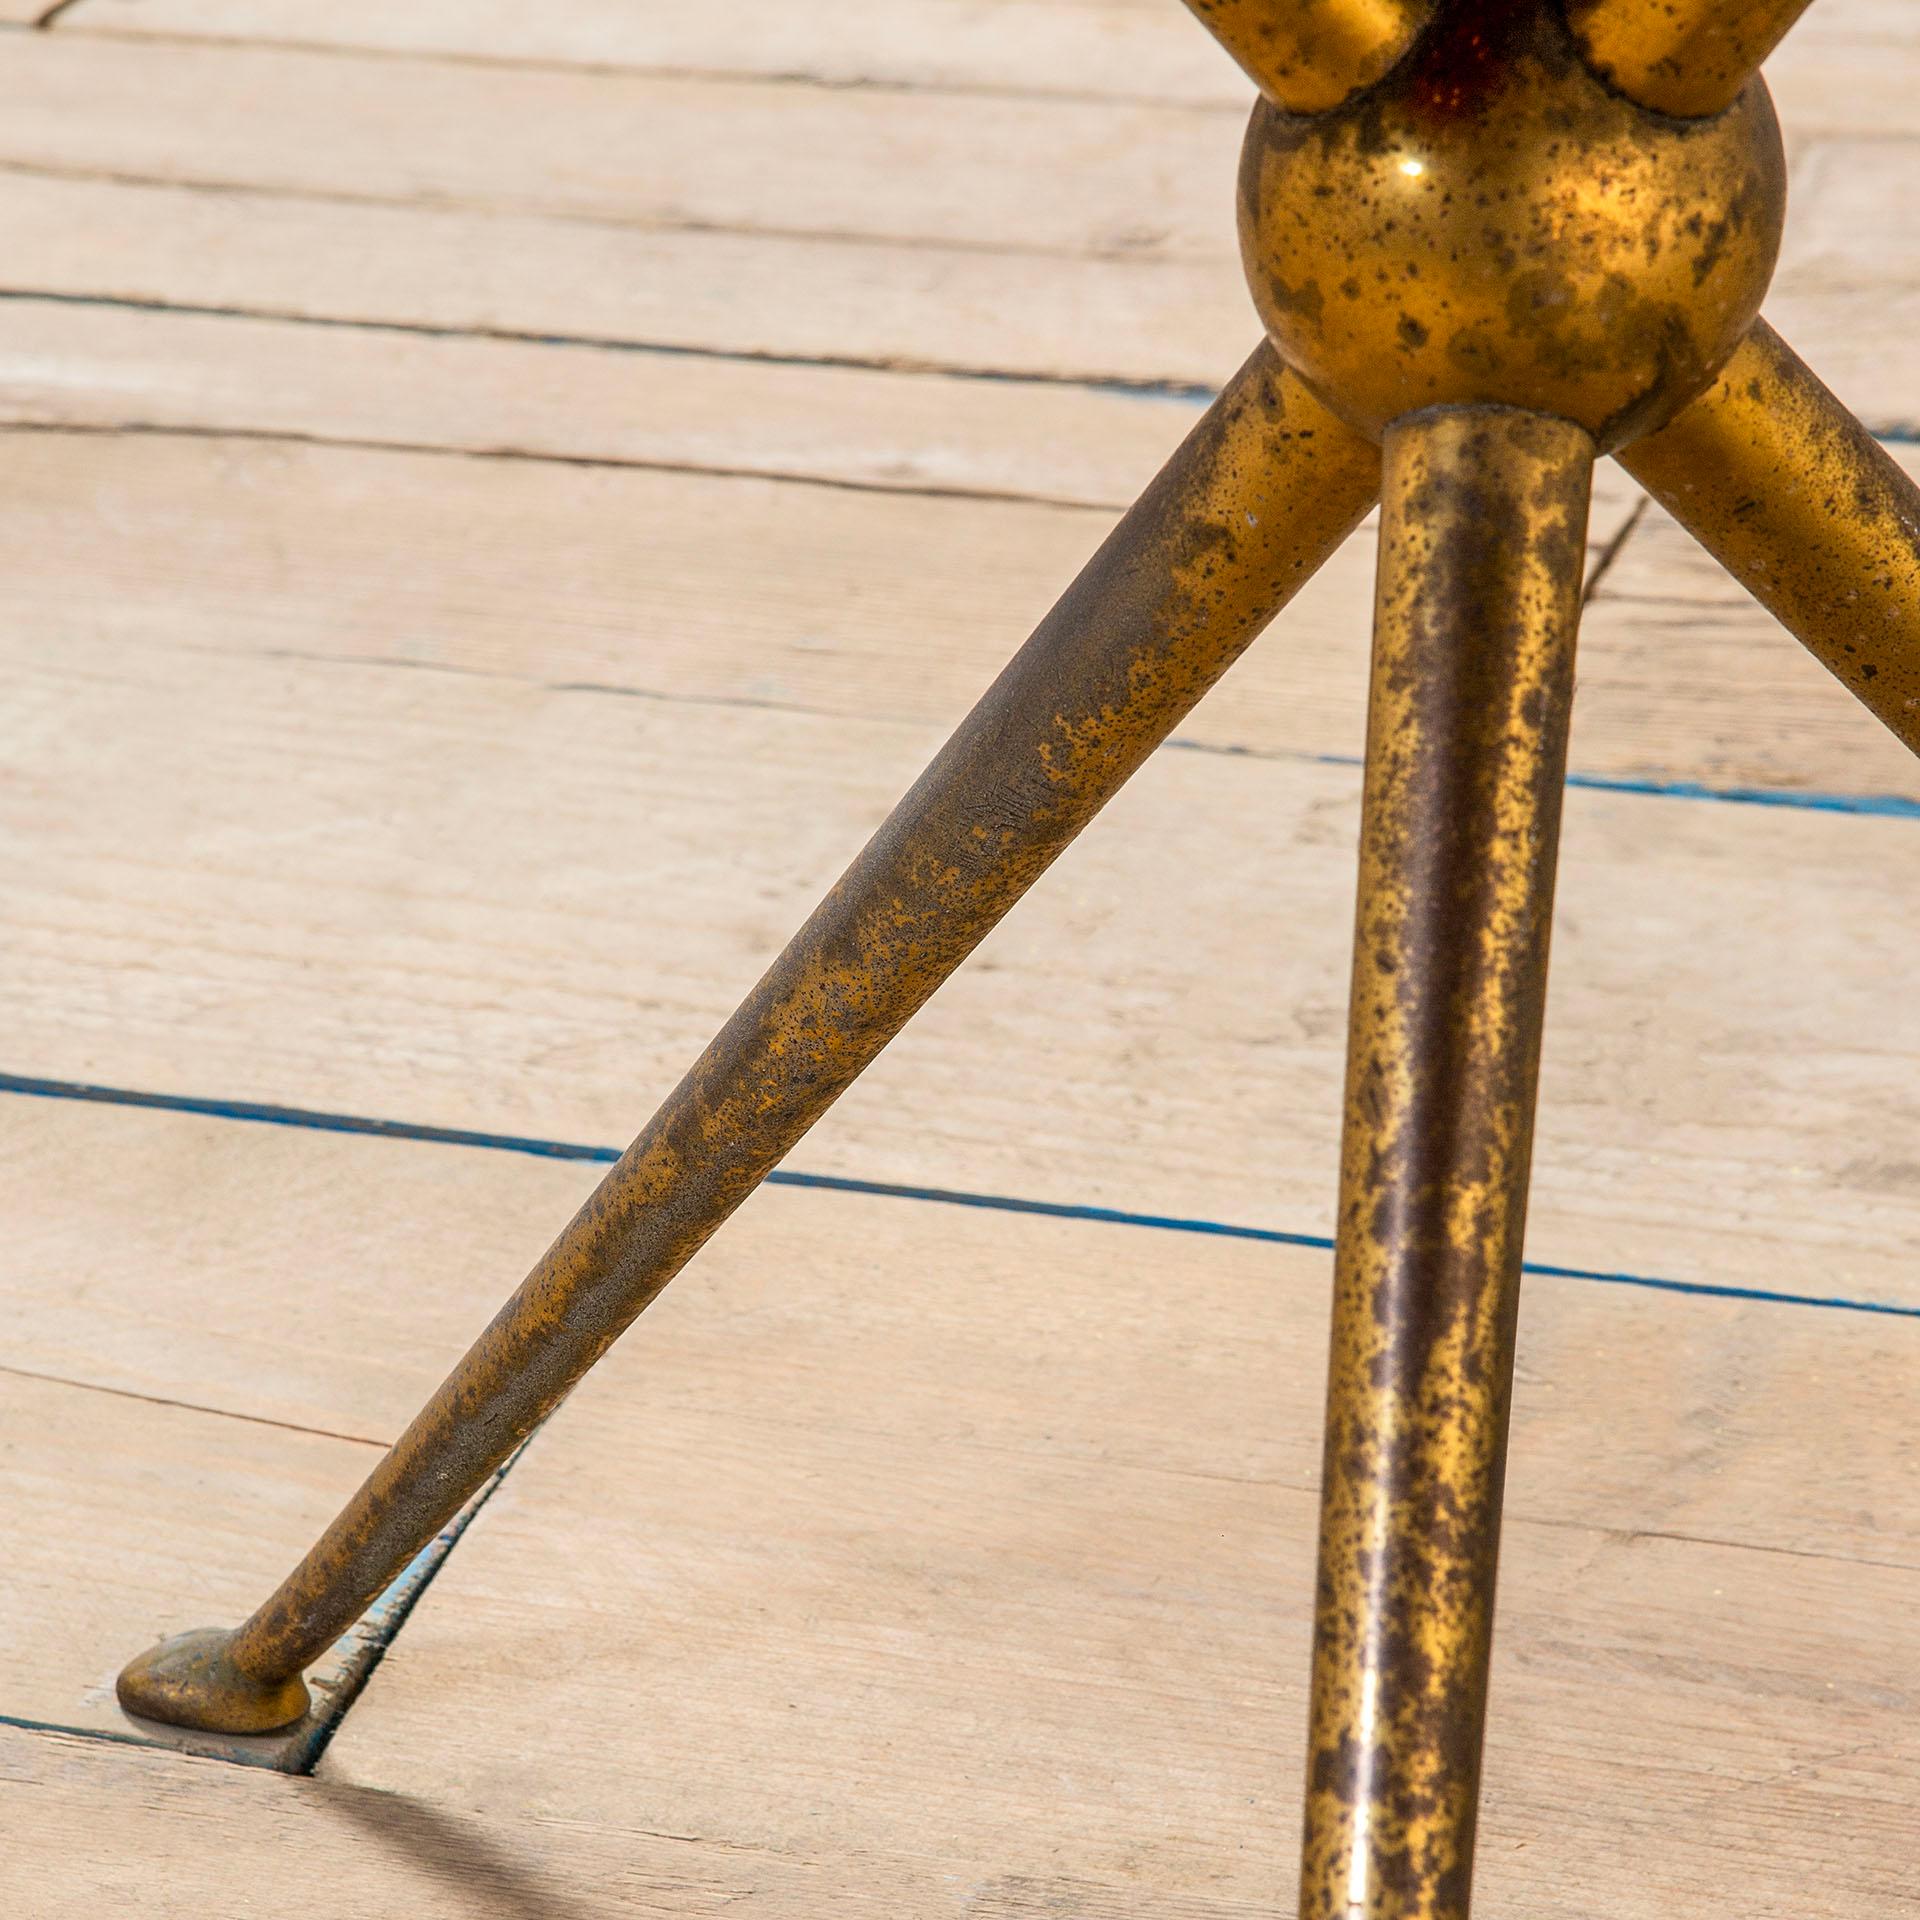 20th Century Osvaldo Borsani Tripod Side Table Brass, Wood and Glass for Abv 50s For Sale 1